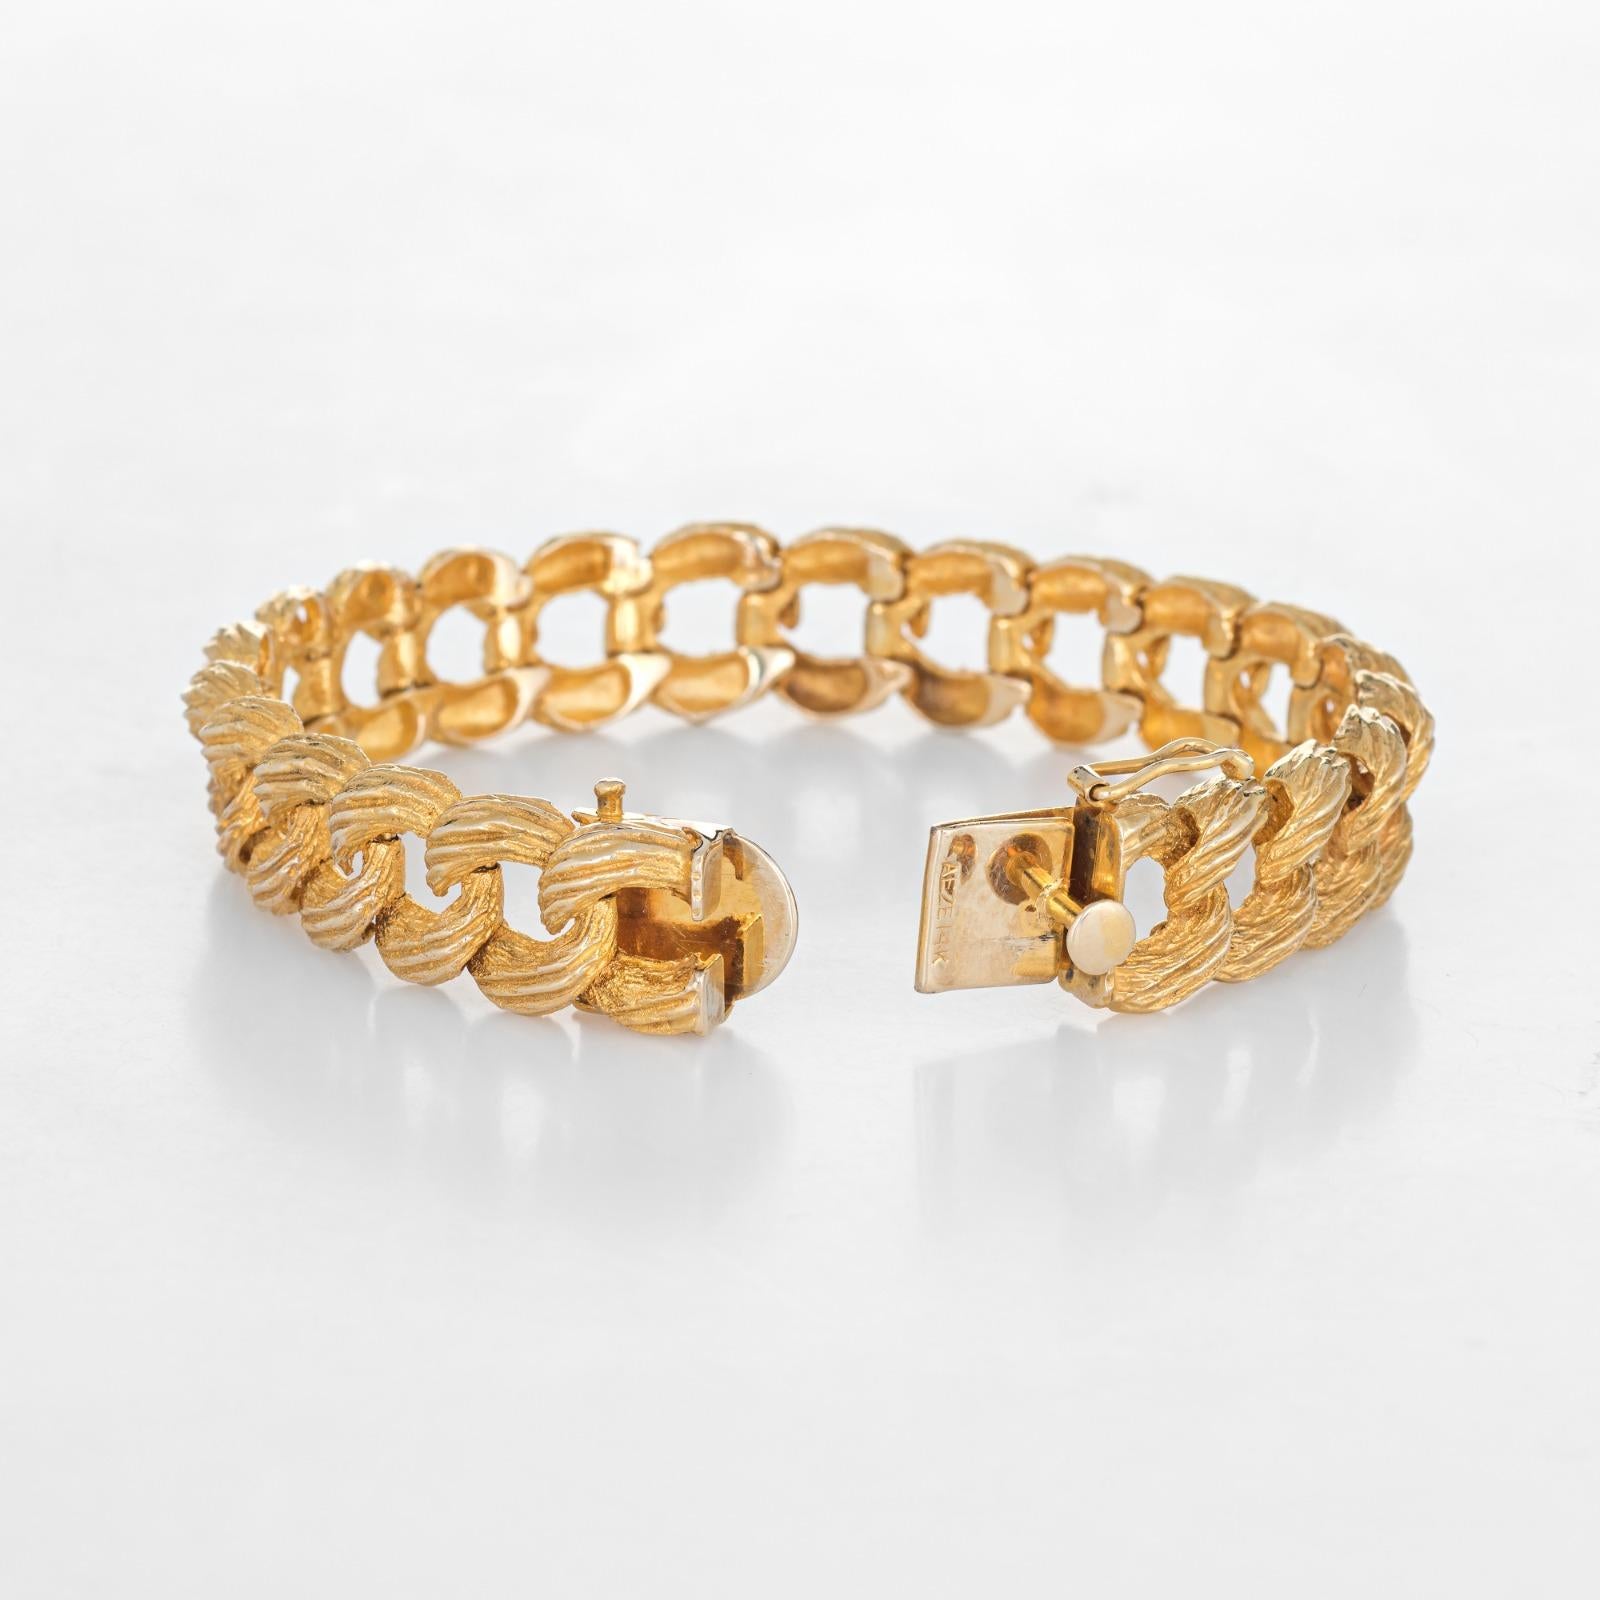 Finely detailed textured curb link bracelet crafted in 14 karat yellow gold (circa 1980s to 1990s). 

The curb link bracelet measures 12.5mm wide (0.49 inches) and features an organic like textured design, offering a subtle and warm glow to the